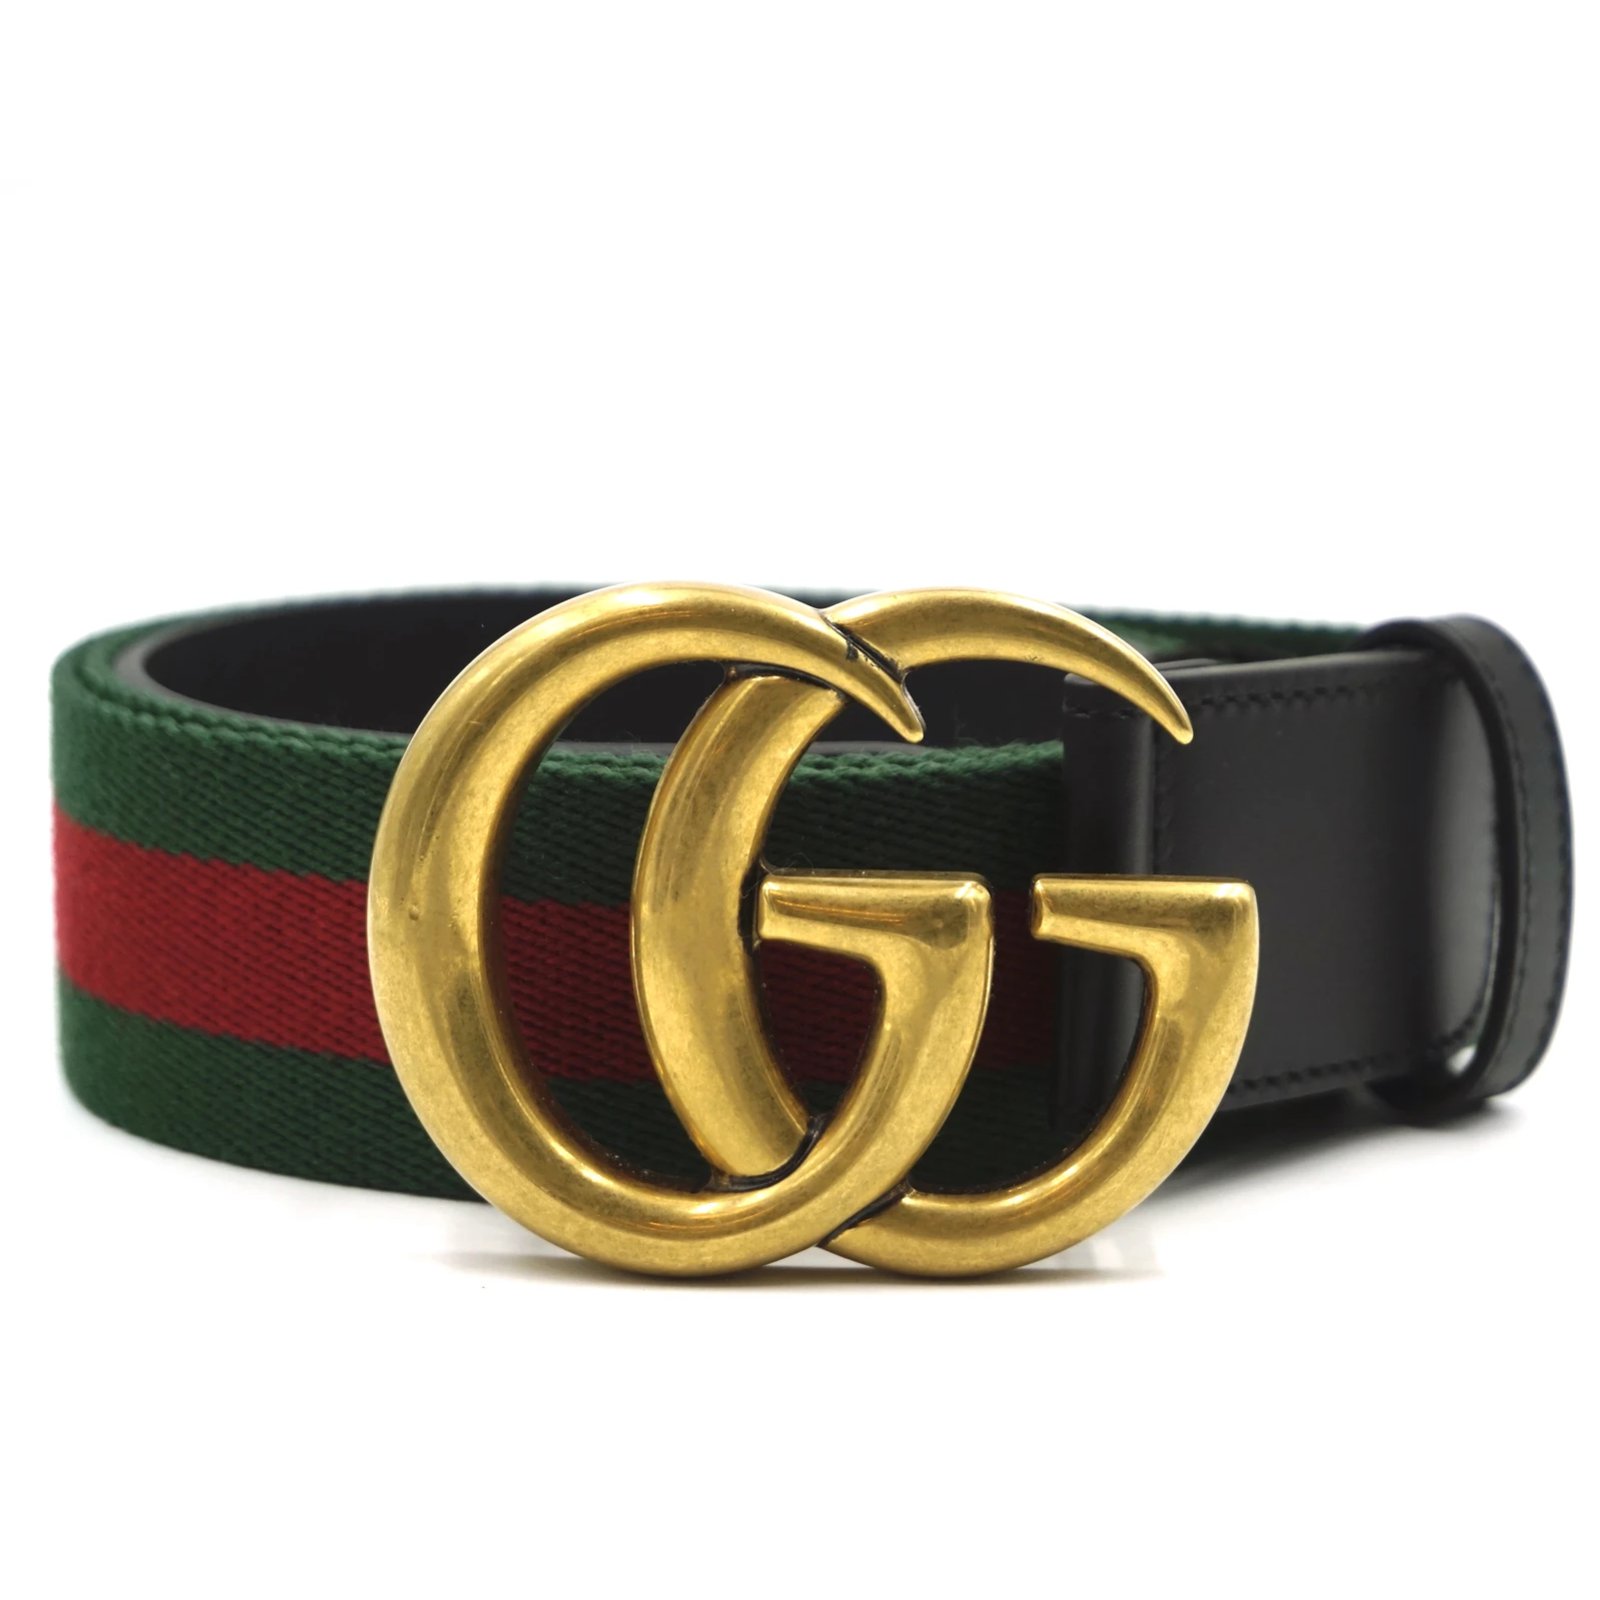 red and green gucci belt gold buckle